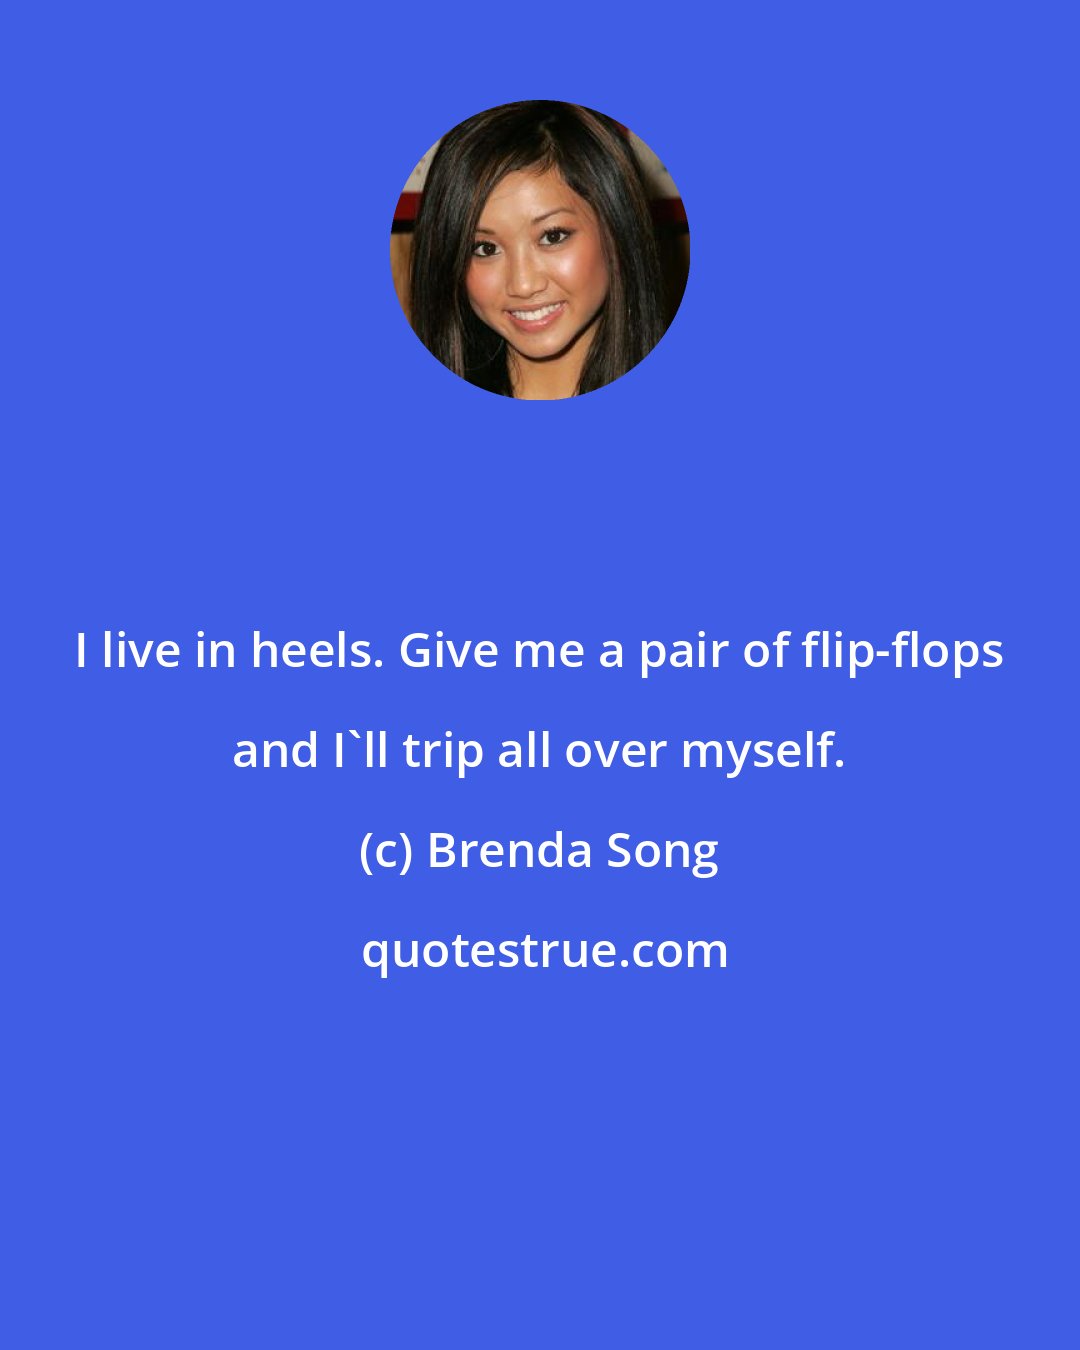 Brenda Song: I live in heels. Give me a pair of flip-flops and I'll trip all over myself.